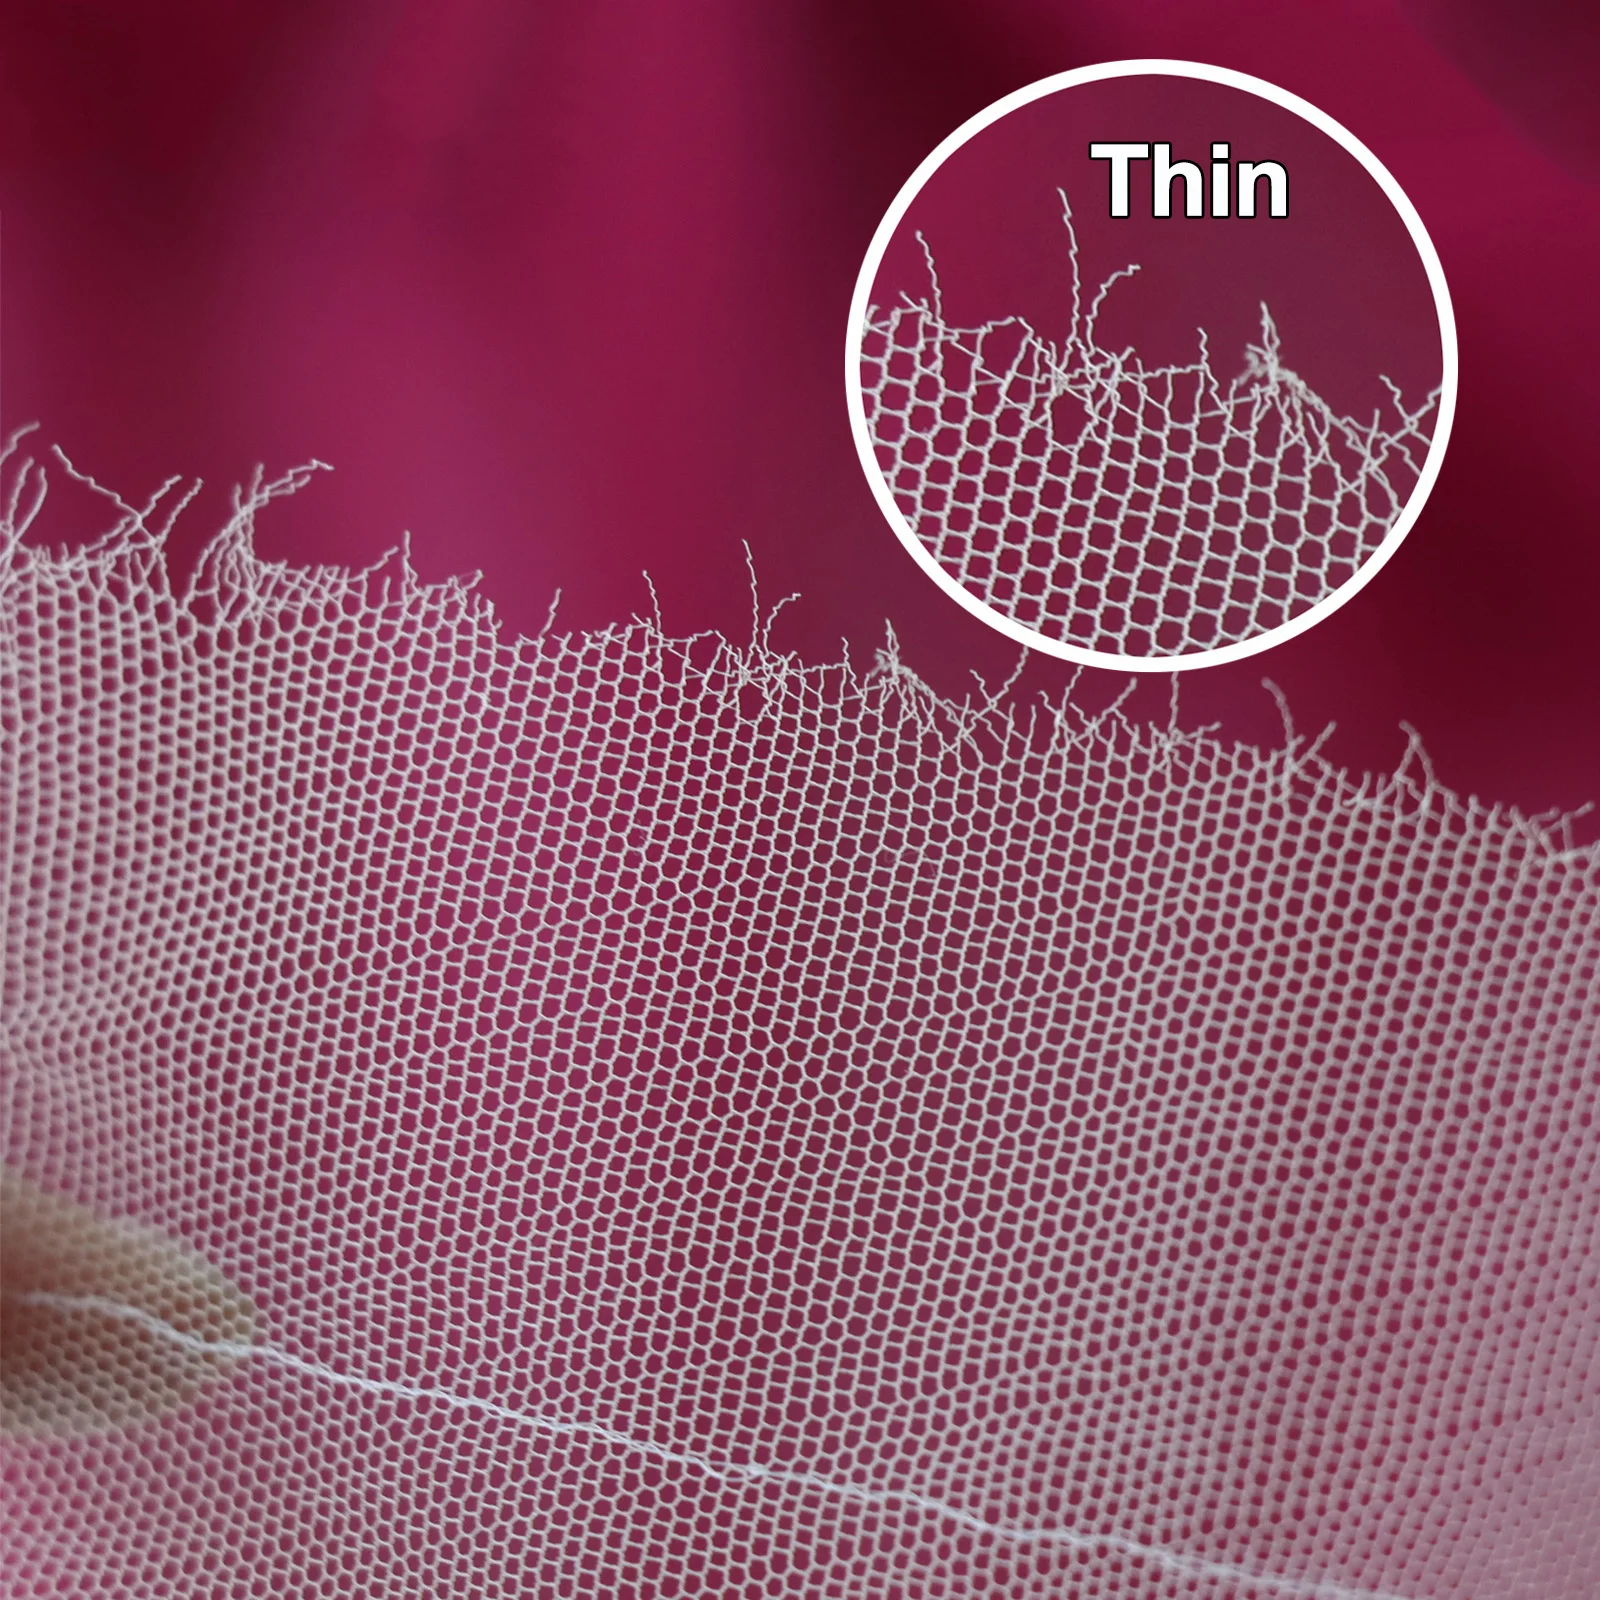 

HD Lace Net Transparent Invisible Swiss Lace Net Fabric 1 Yard Wig Caps Base Material Closure Frontal Hair Nets For Making Wigs